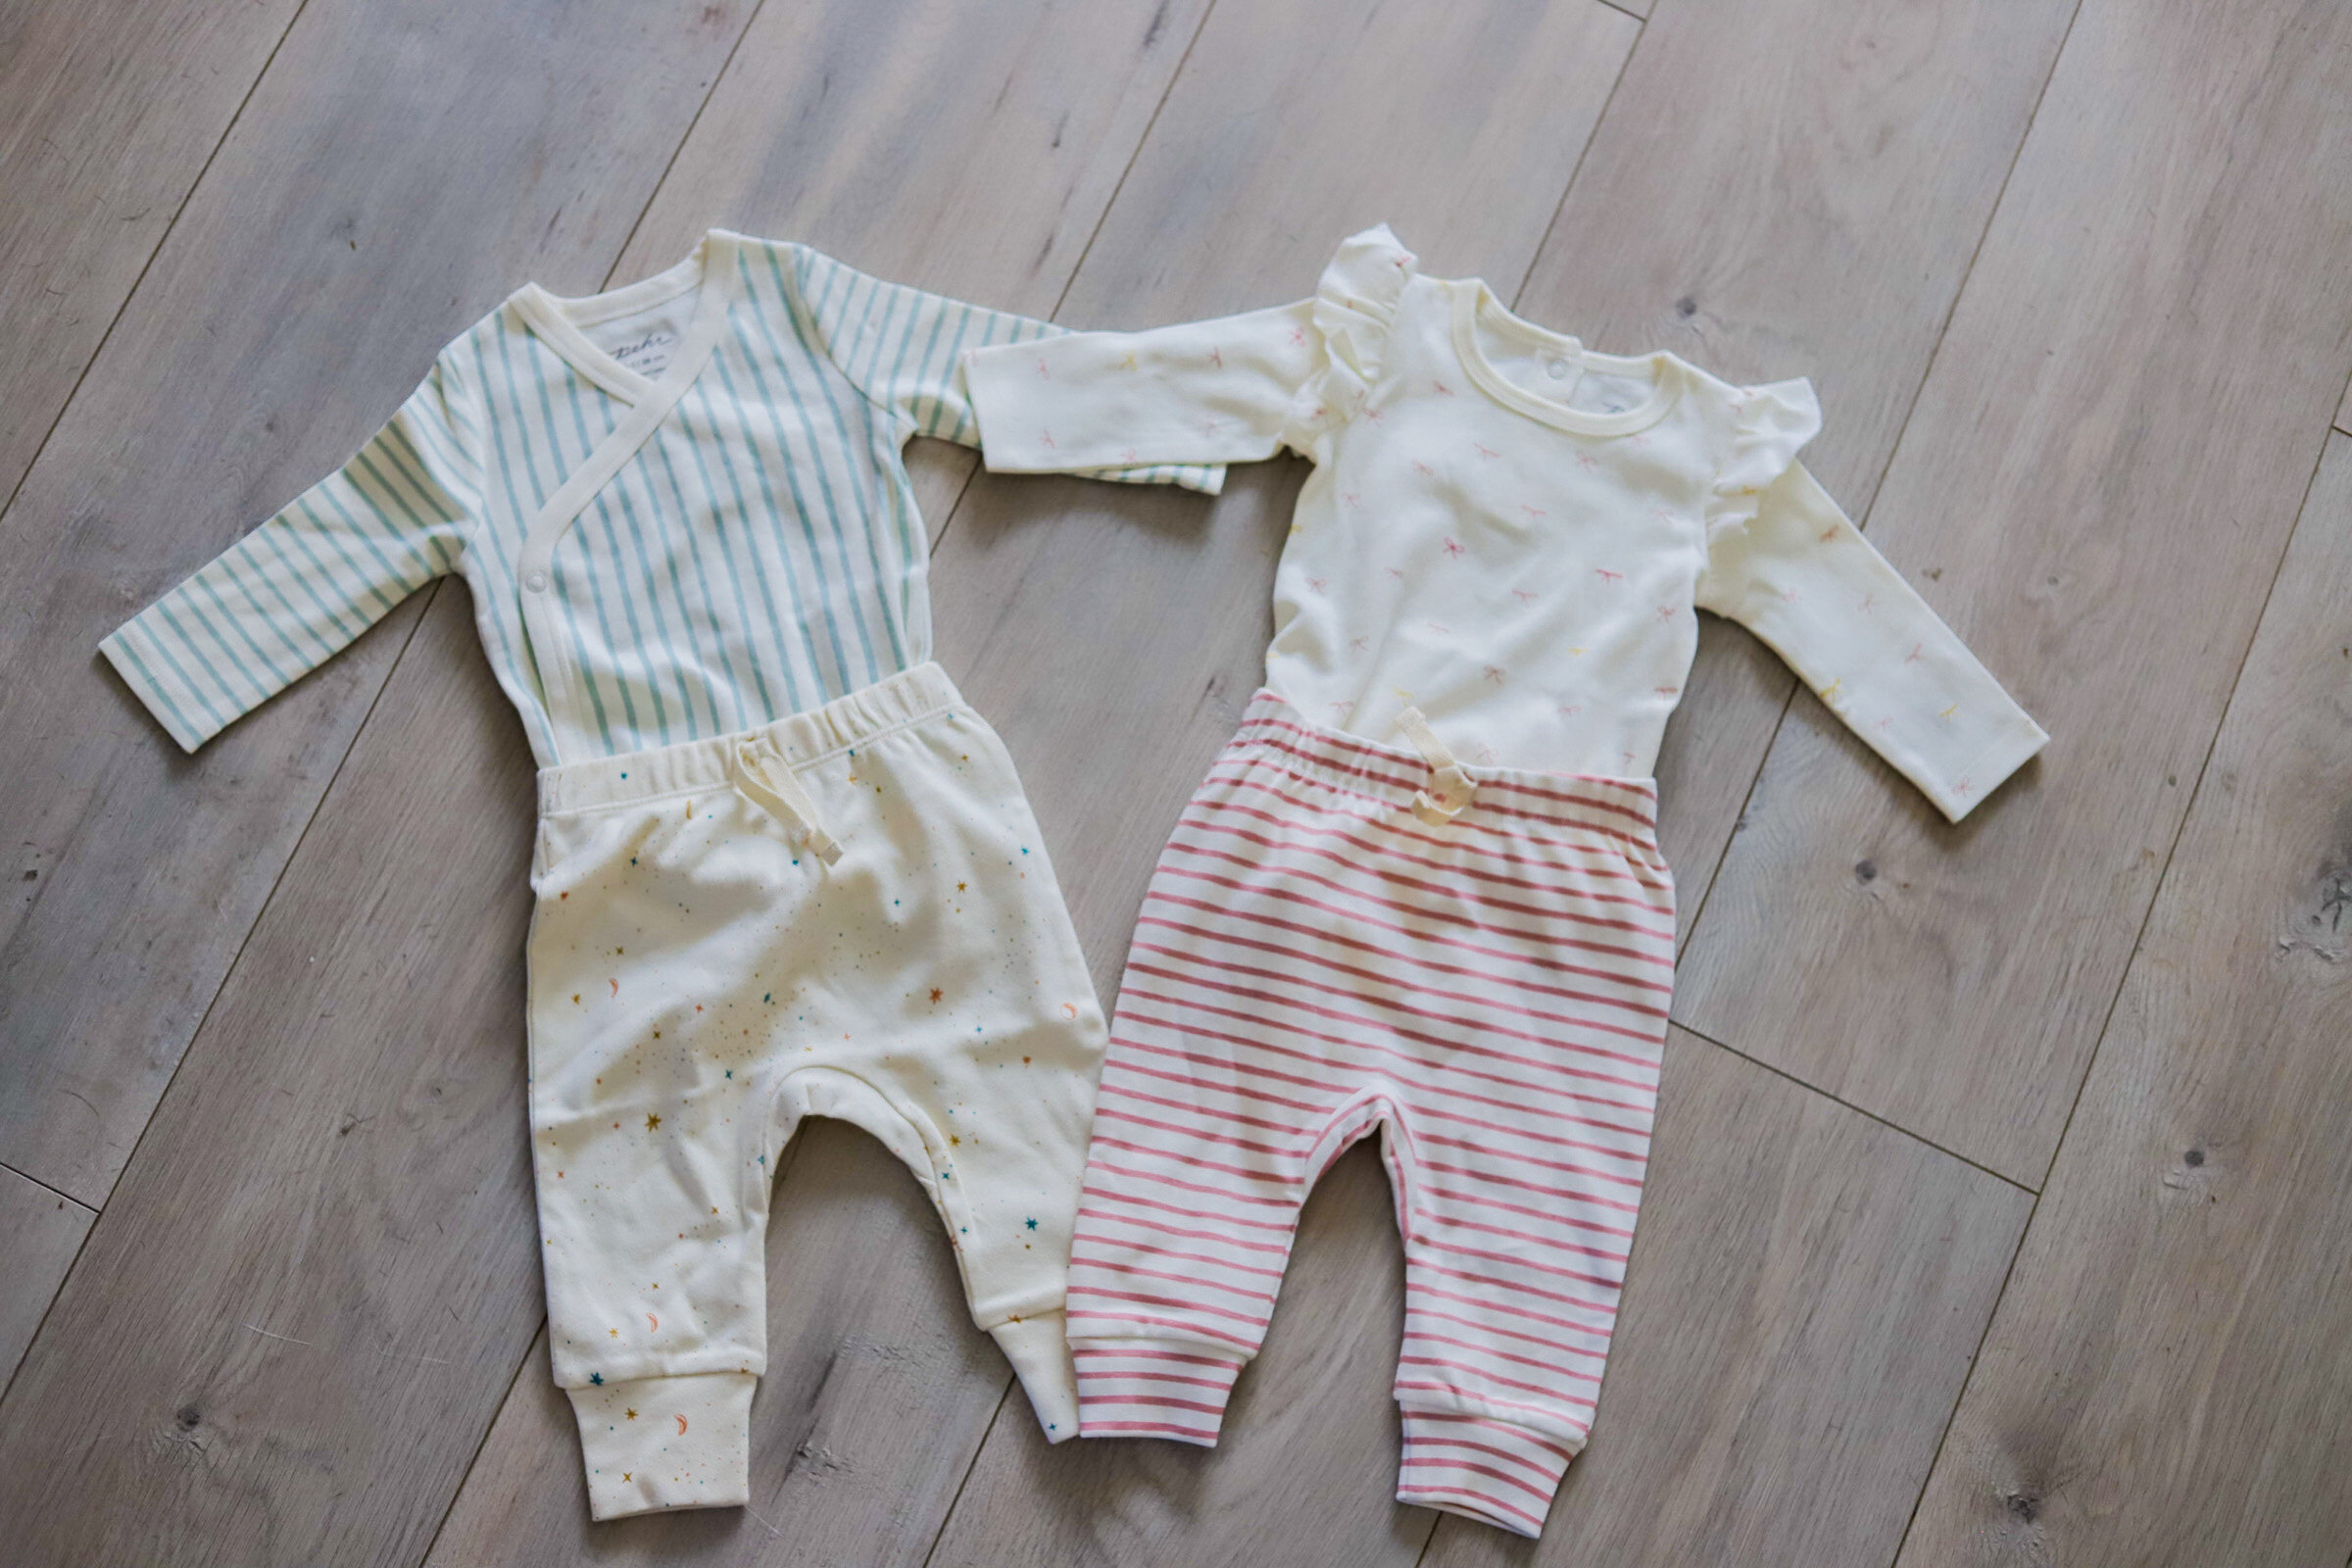 pehr baby clothes, organic baby clothes, going home outfits, boy girl twins, twin gender reveal, sweet dreams bakery oc, di-di twins, boy girl twins, lments of style, la blogger, sex of the baby announcement, gender reveal ideas, intimate gender rev…